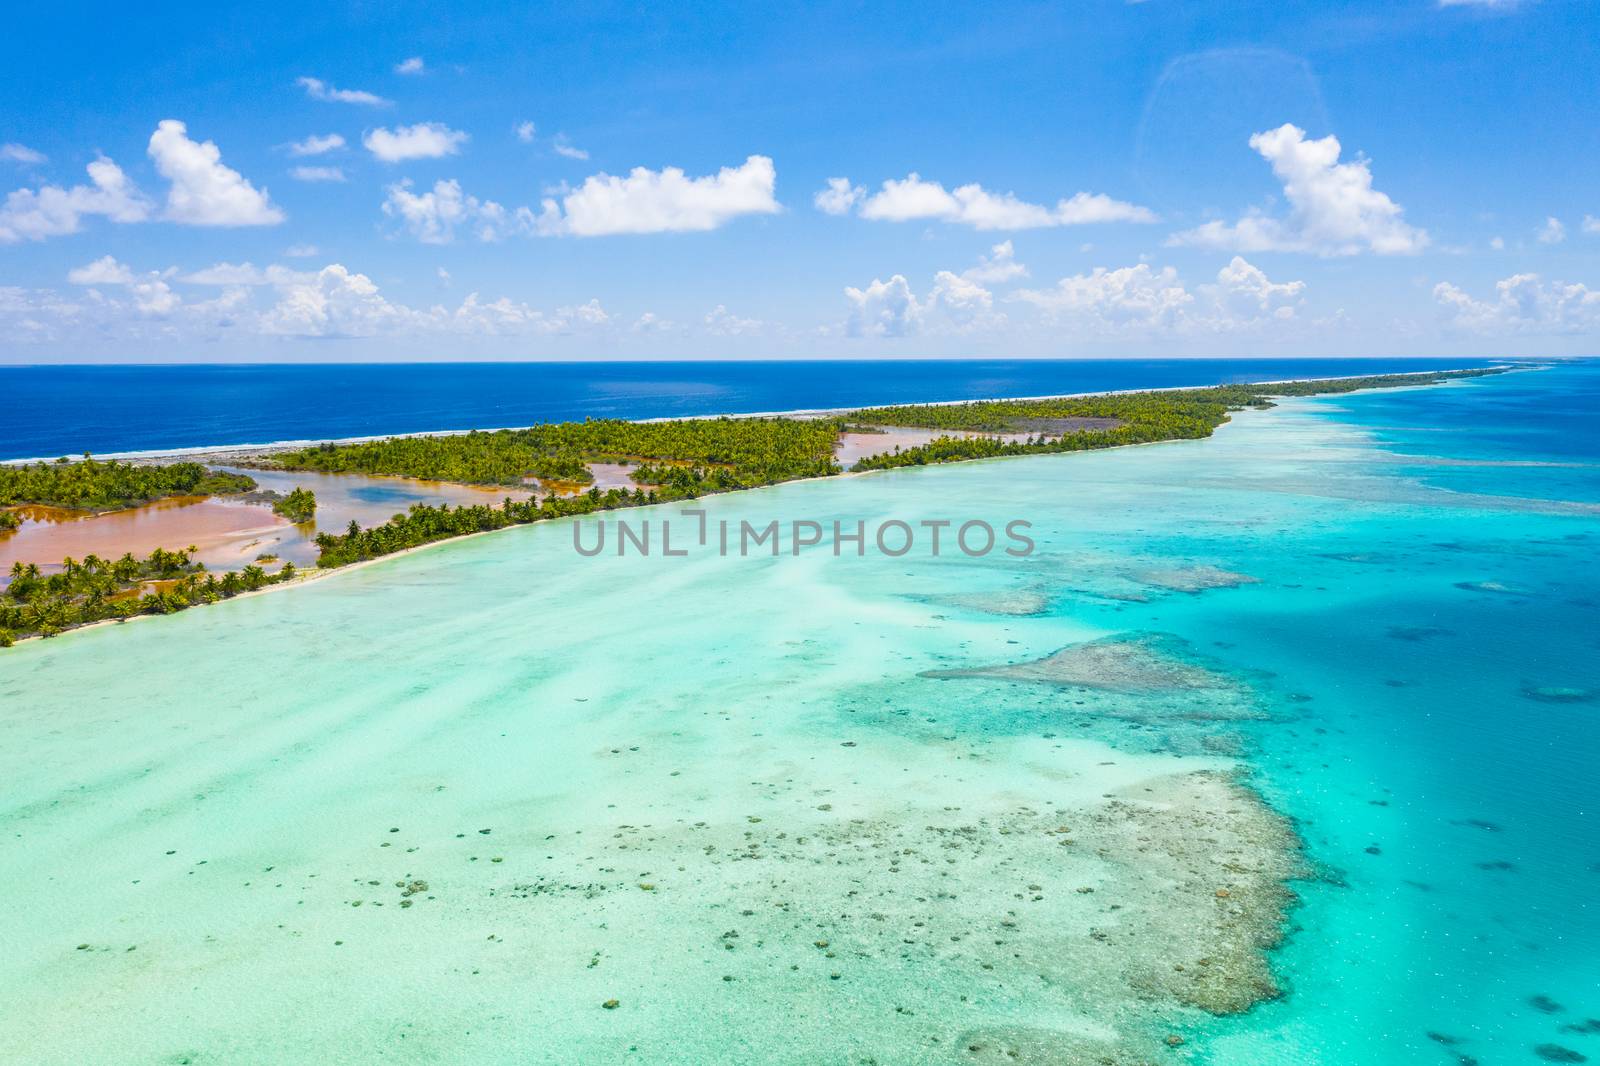 Drone video of French Polynesia Tahiti Fakarava atoll and famous Blue Lagoon and motu island with perfect beach, coral reef and Pacific Ocean. Aerial Tropical travel paradise in Tuamotus Islands.